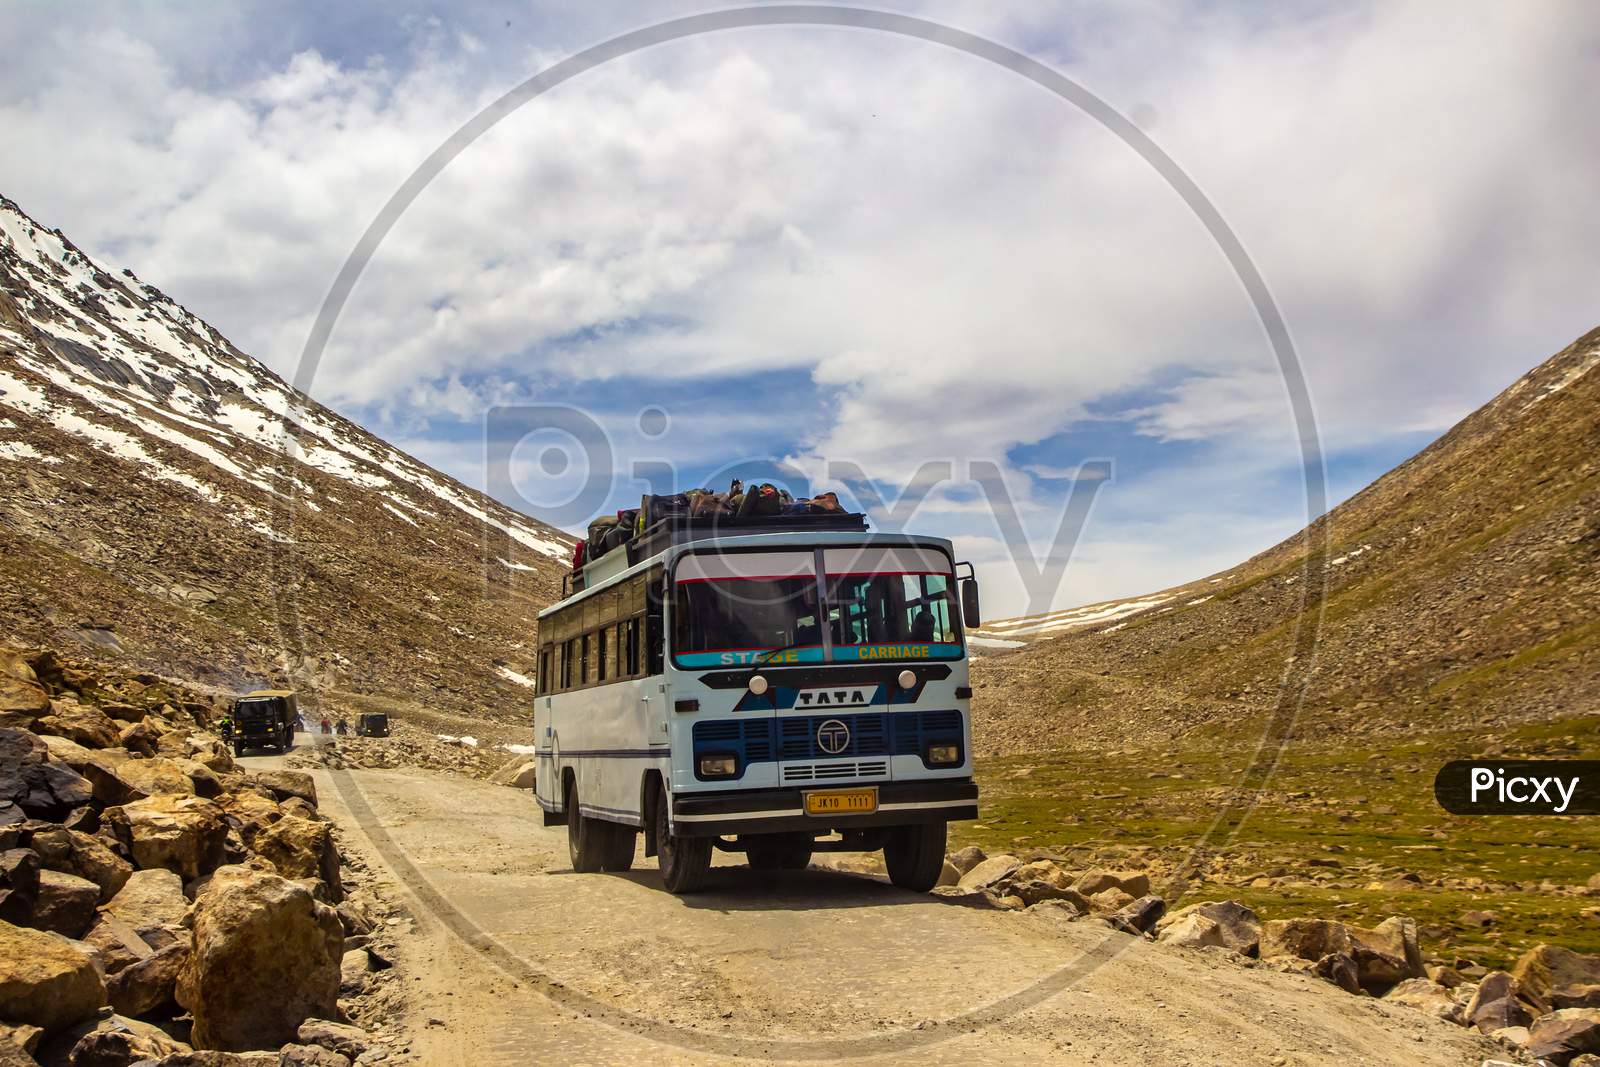 Ladakh,India.  A Public Bus Driving In Rocky Highway Surrounded By Himalayan Mountain During The Day At Ladakh, Kashmir, India.